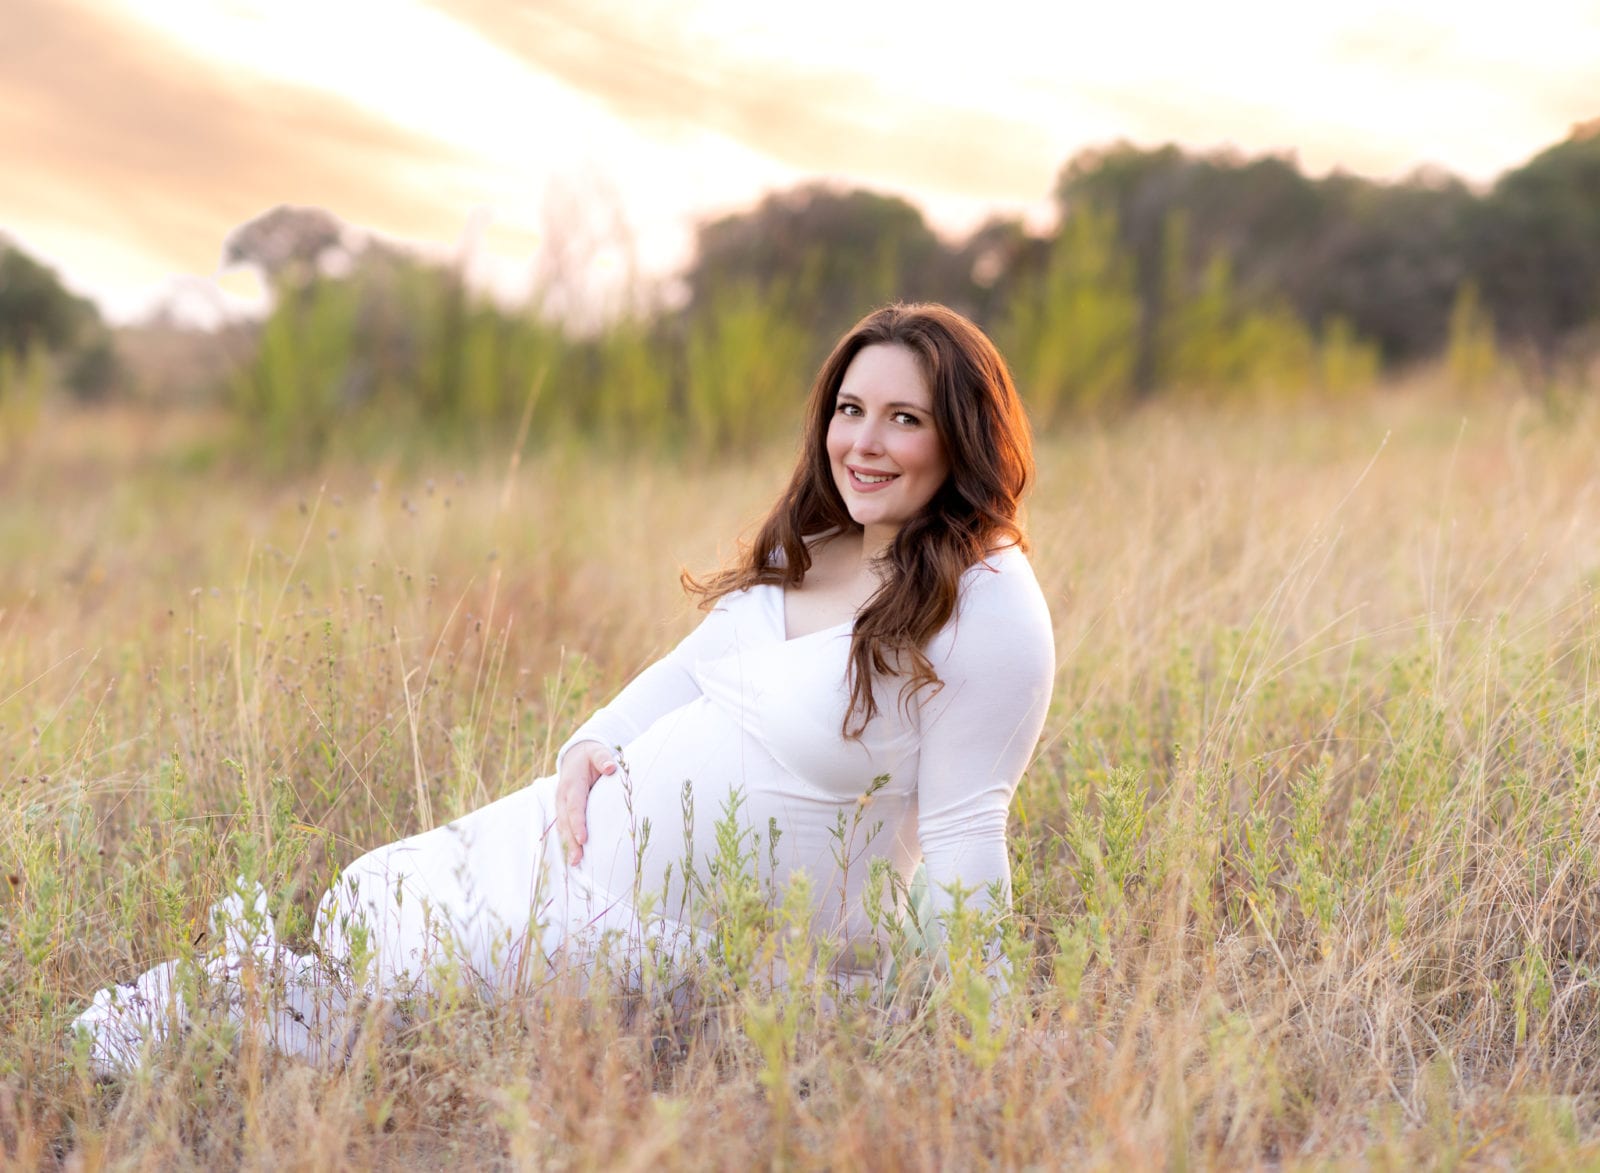 Maternity pics in a field at sunset.